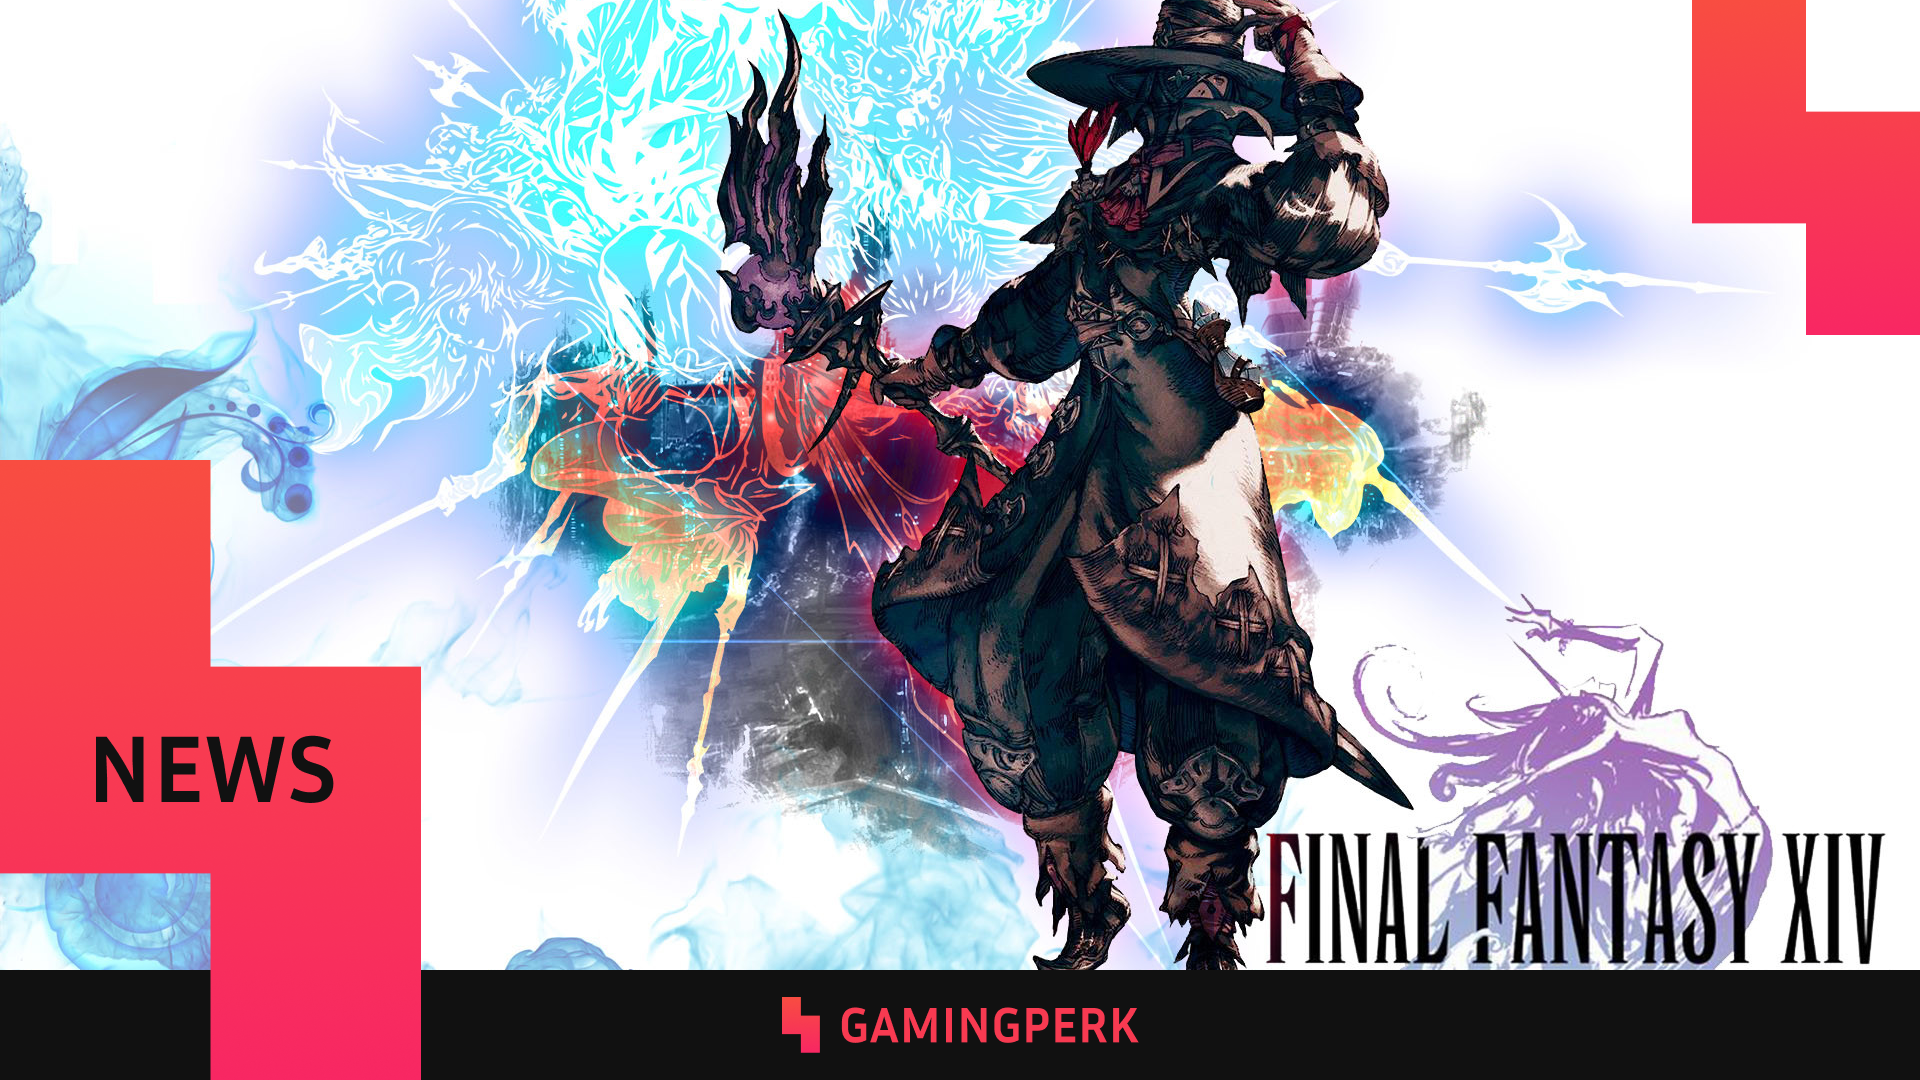 Immerse yourself in the world of Final Fantasy XIV on Xbox with unique premium currency FFXIV Coins